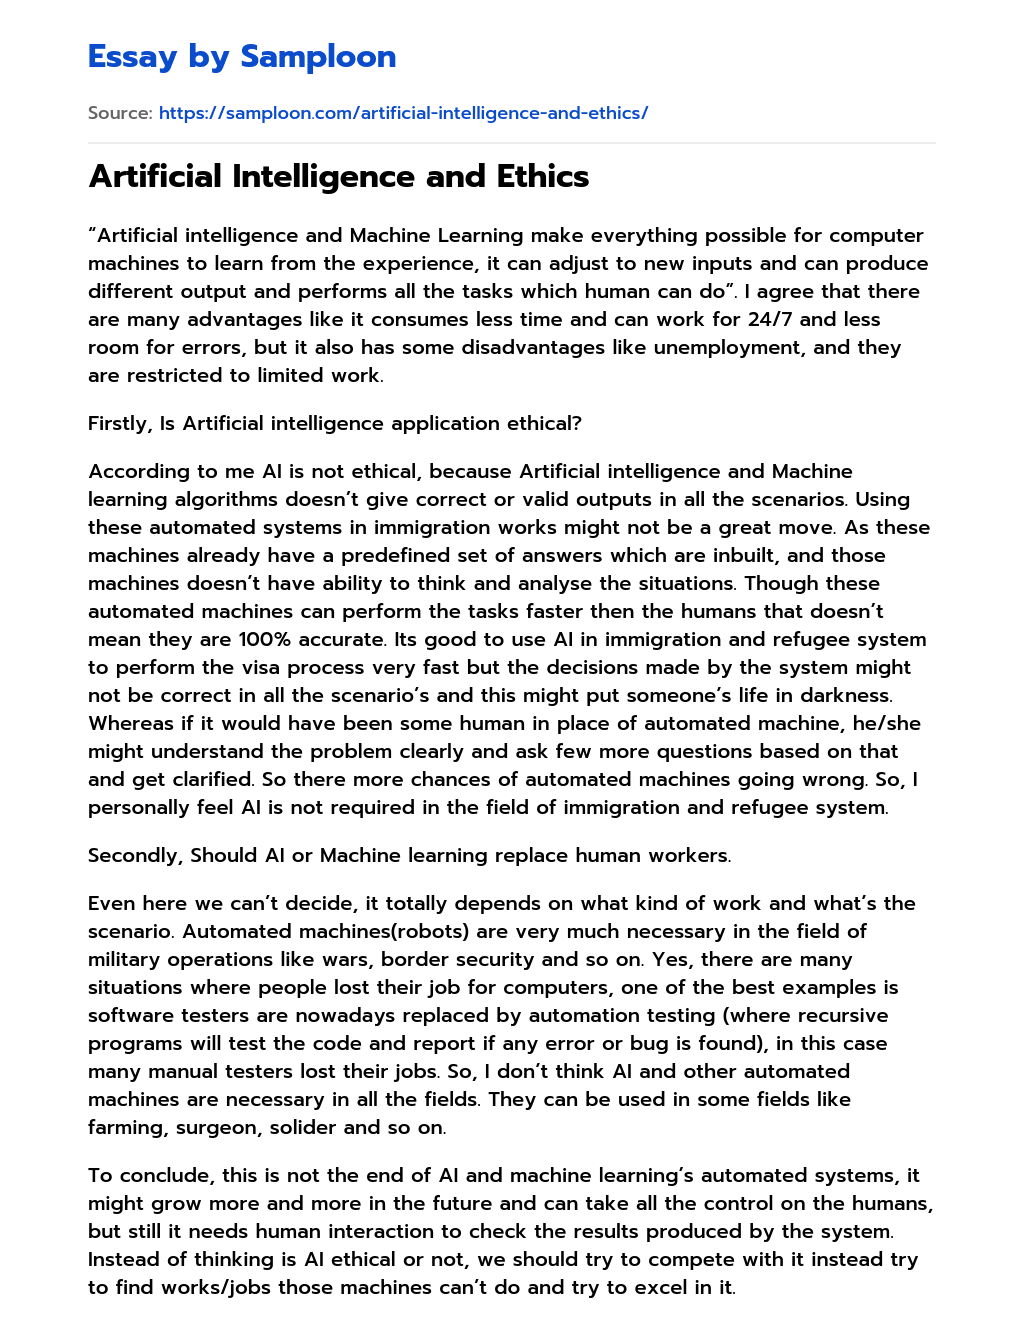 Artificial Intelligence and Ethics essay